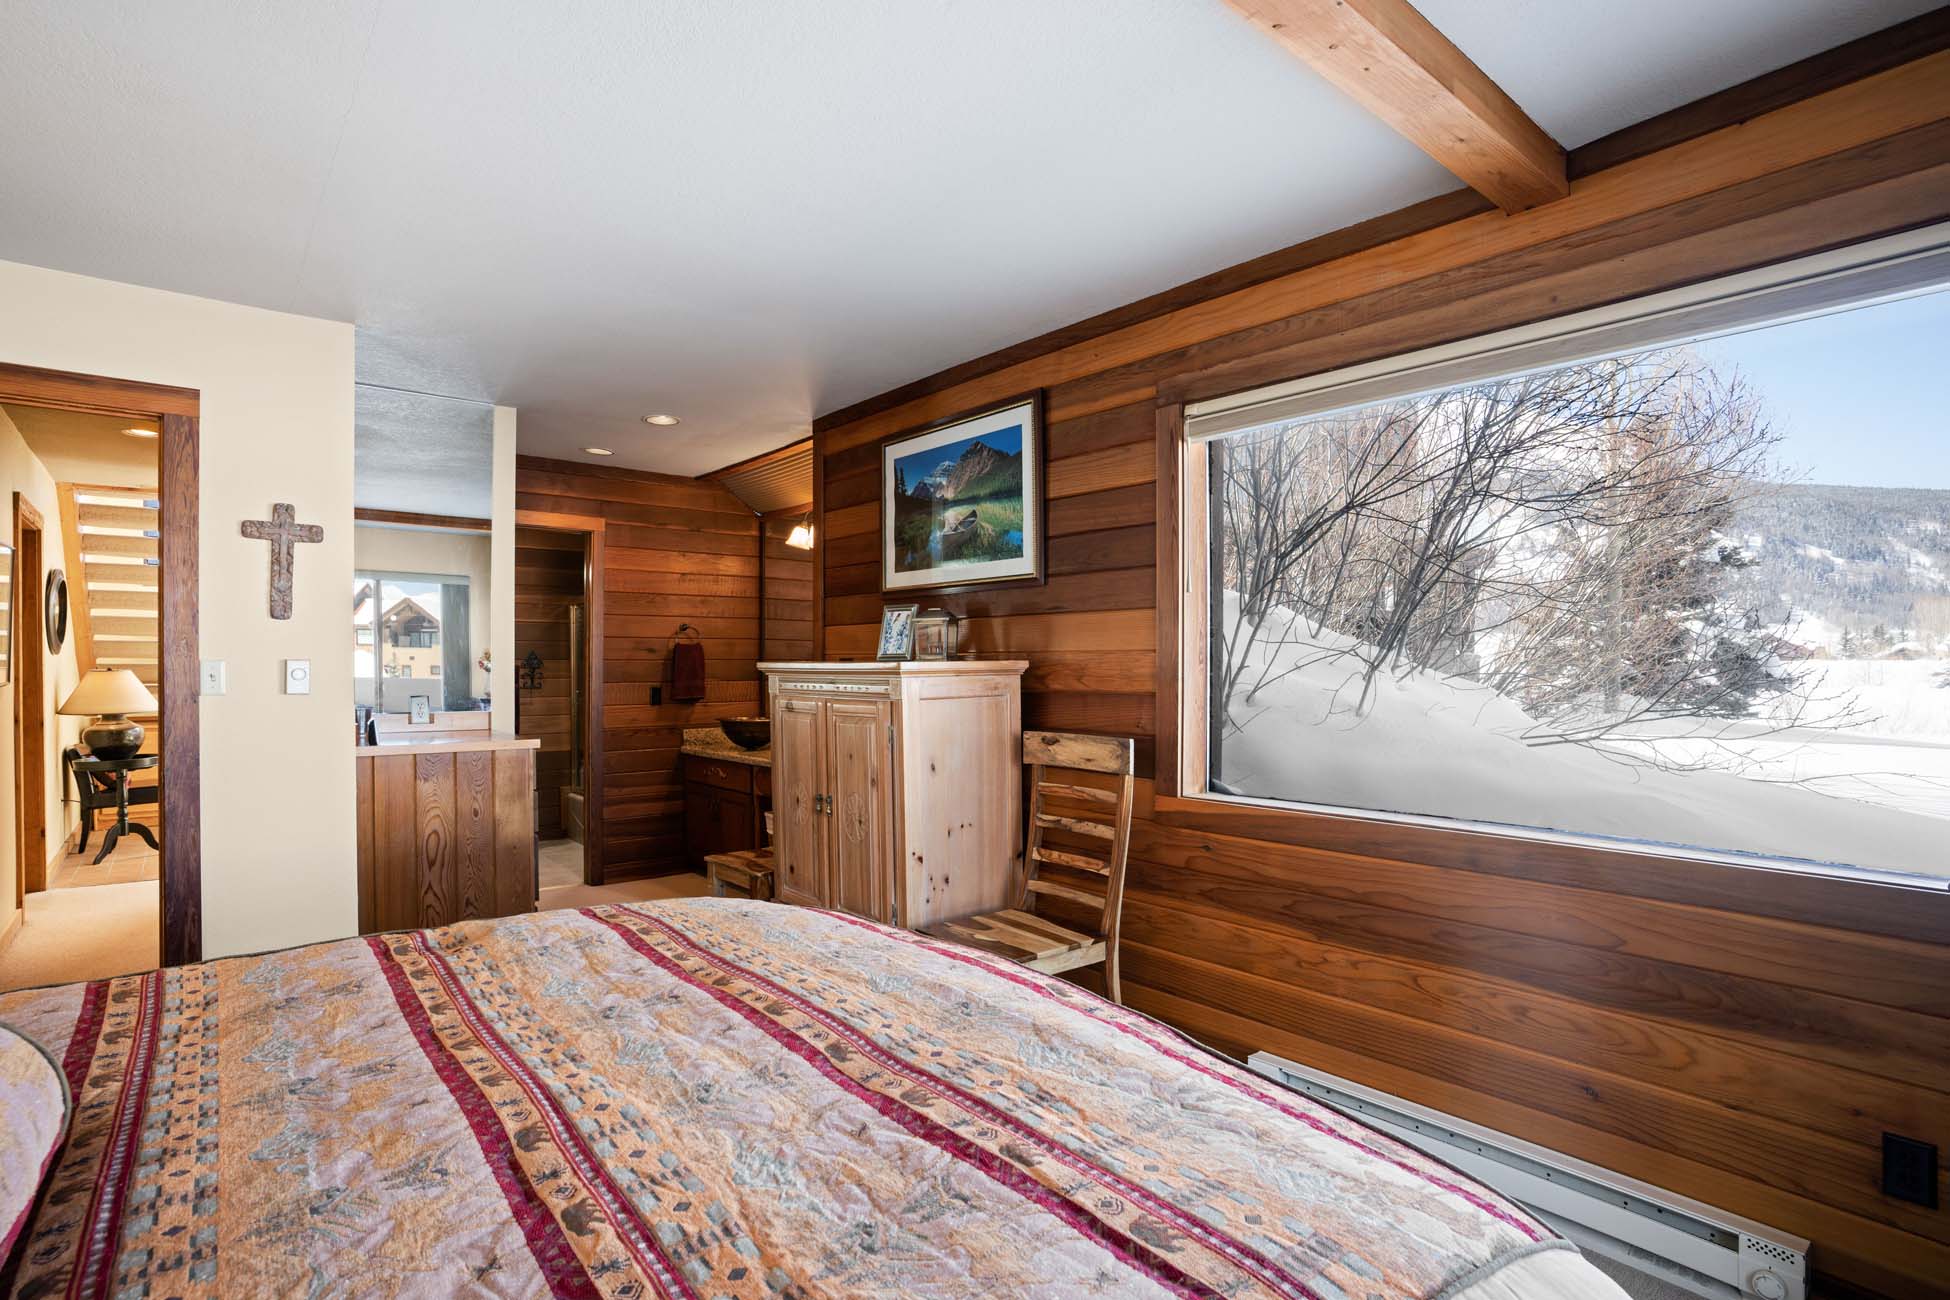 49 Powderview Drive, Crested Butte Colorado - bedroom